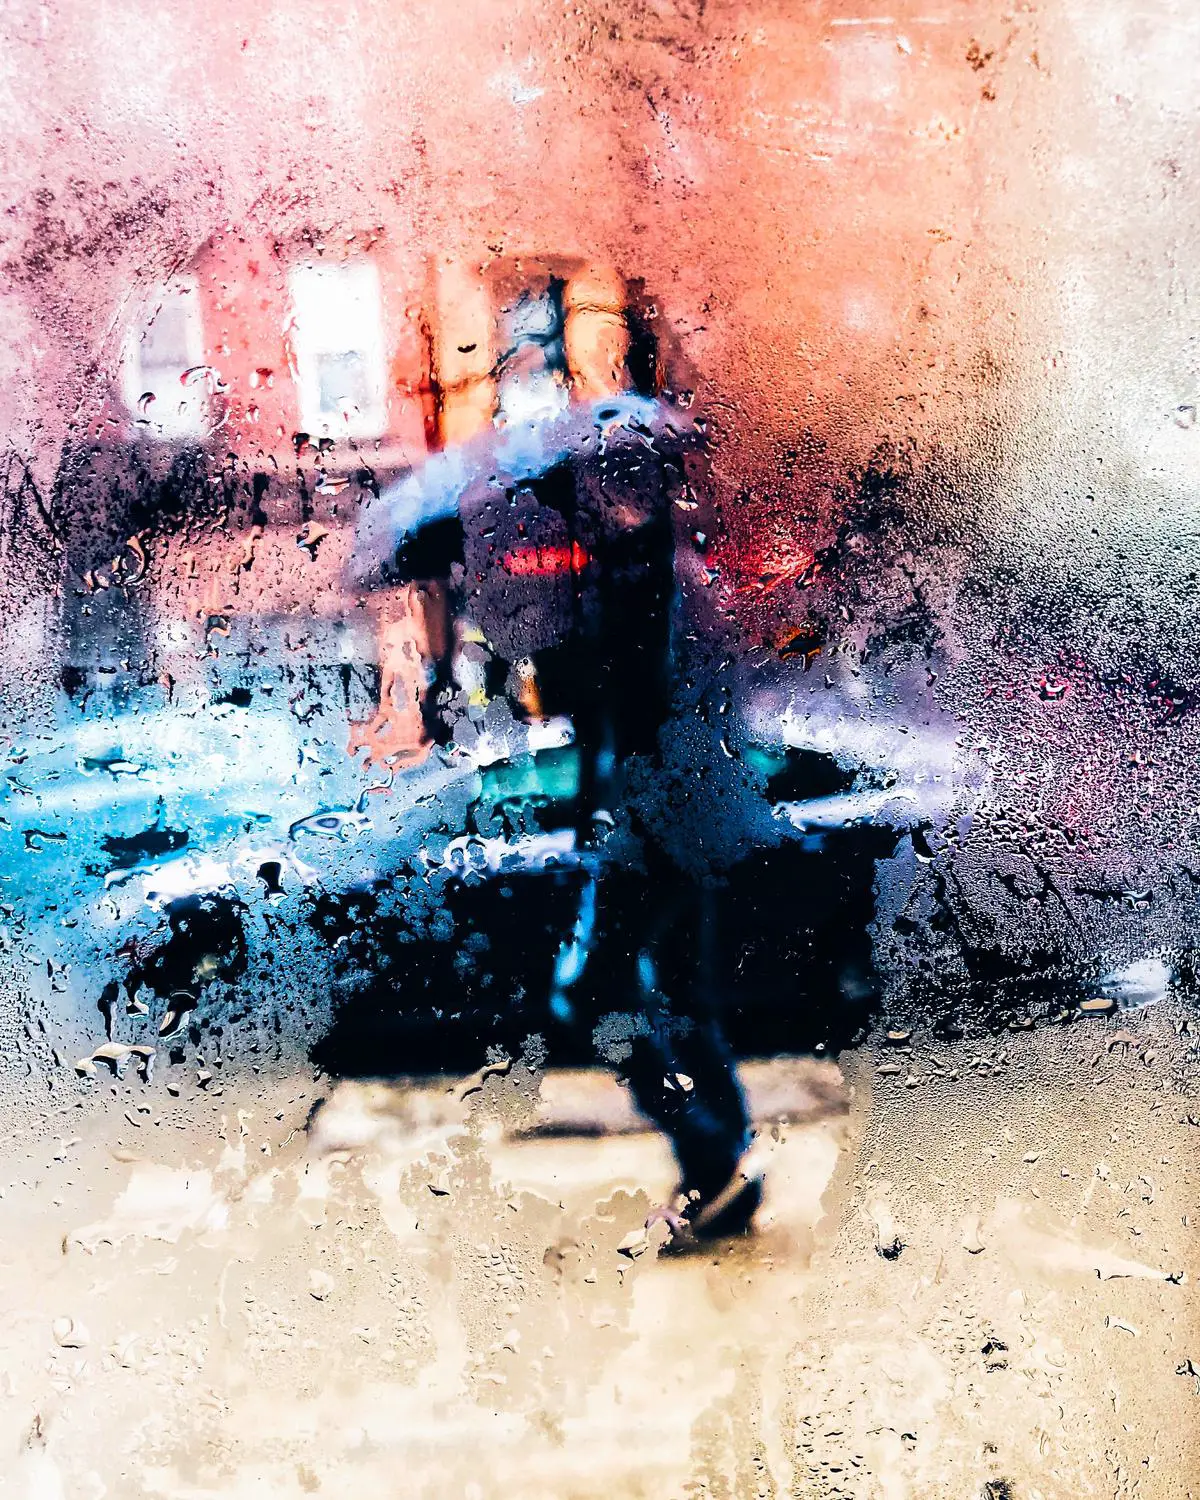 Image depicting a person holding an umbrella in heavy rain, symbolizing the concept of unforeseen circumstances.